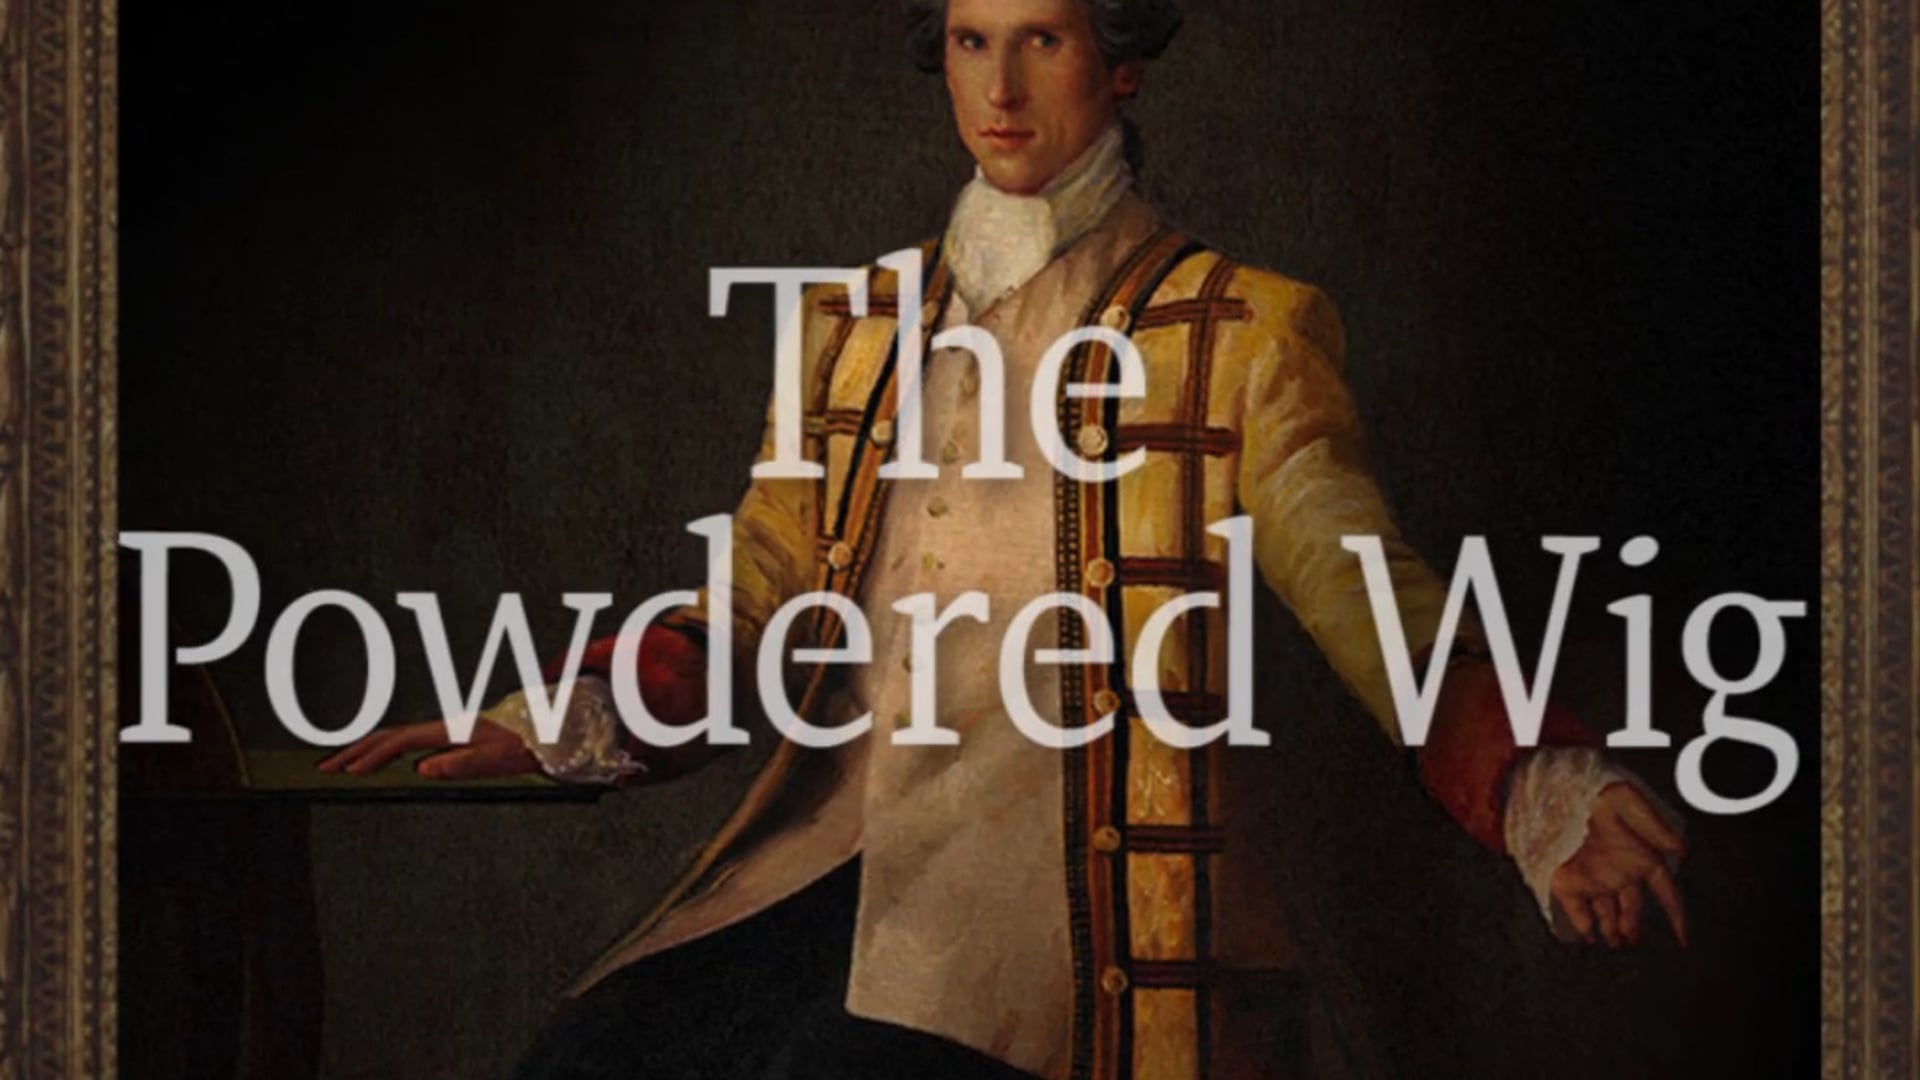 Horrors of 1719 Part 2 - The Powdered Wig